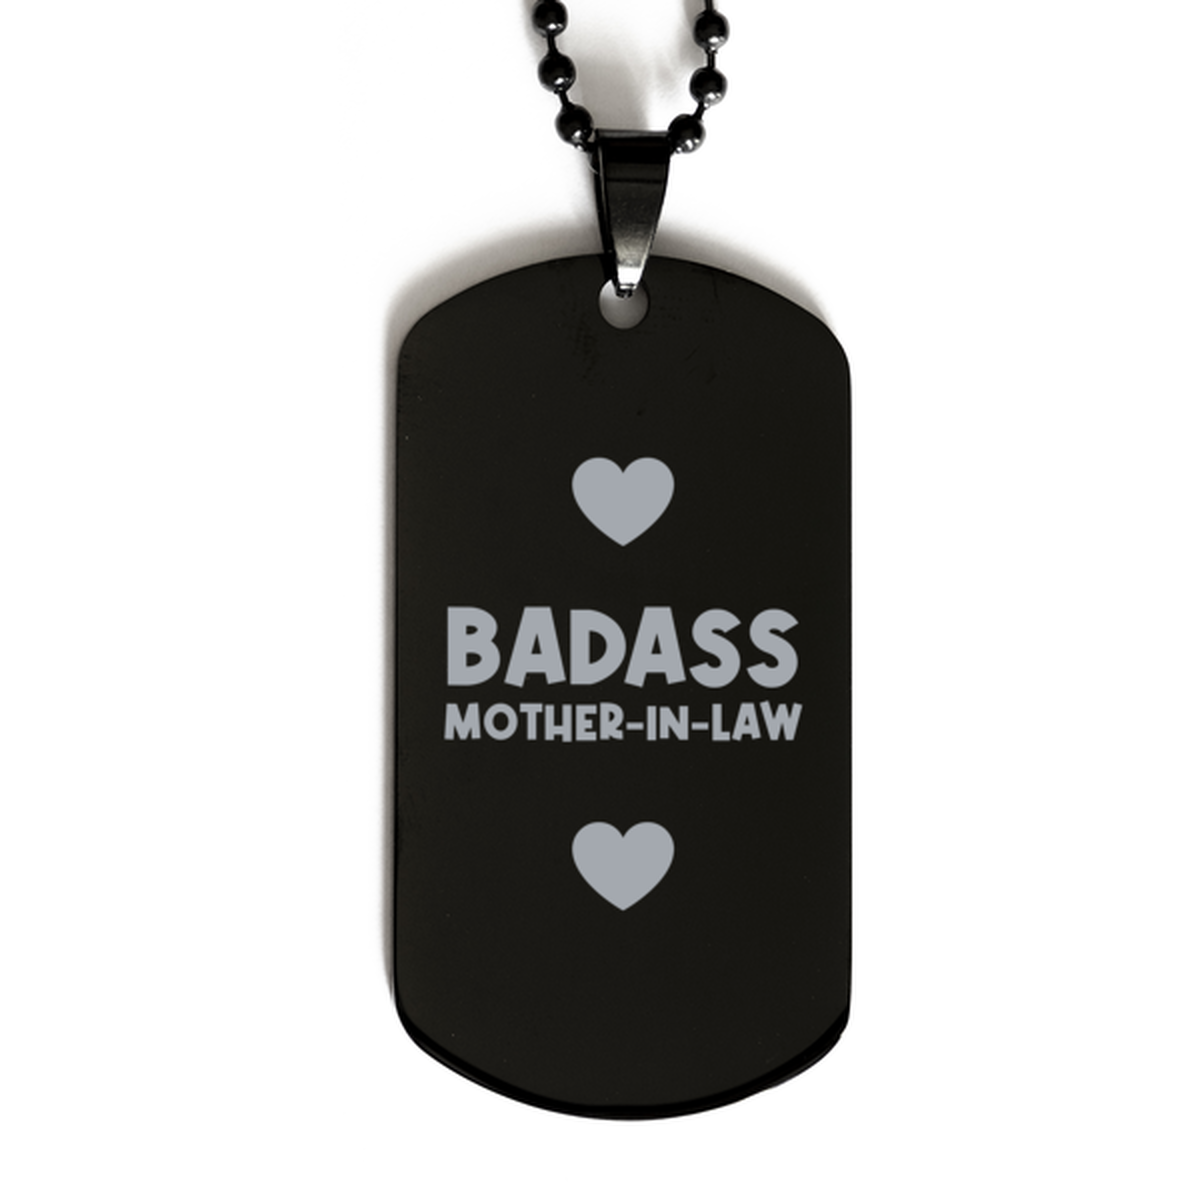 Mother-in-law Black Dog Tag, Badass Mother-in-law, Funny Family Gifts  Necklace For Mother-in-law From Son Daughter